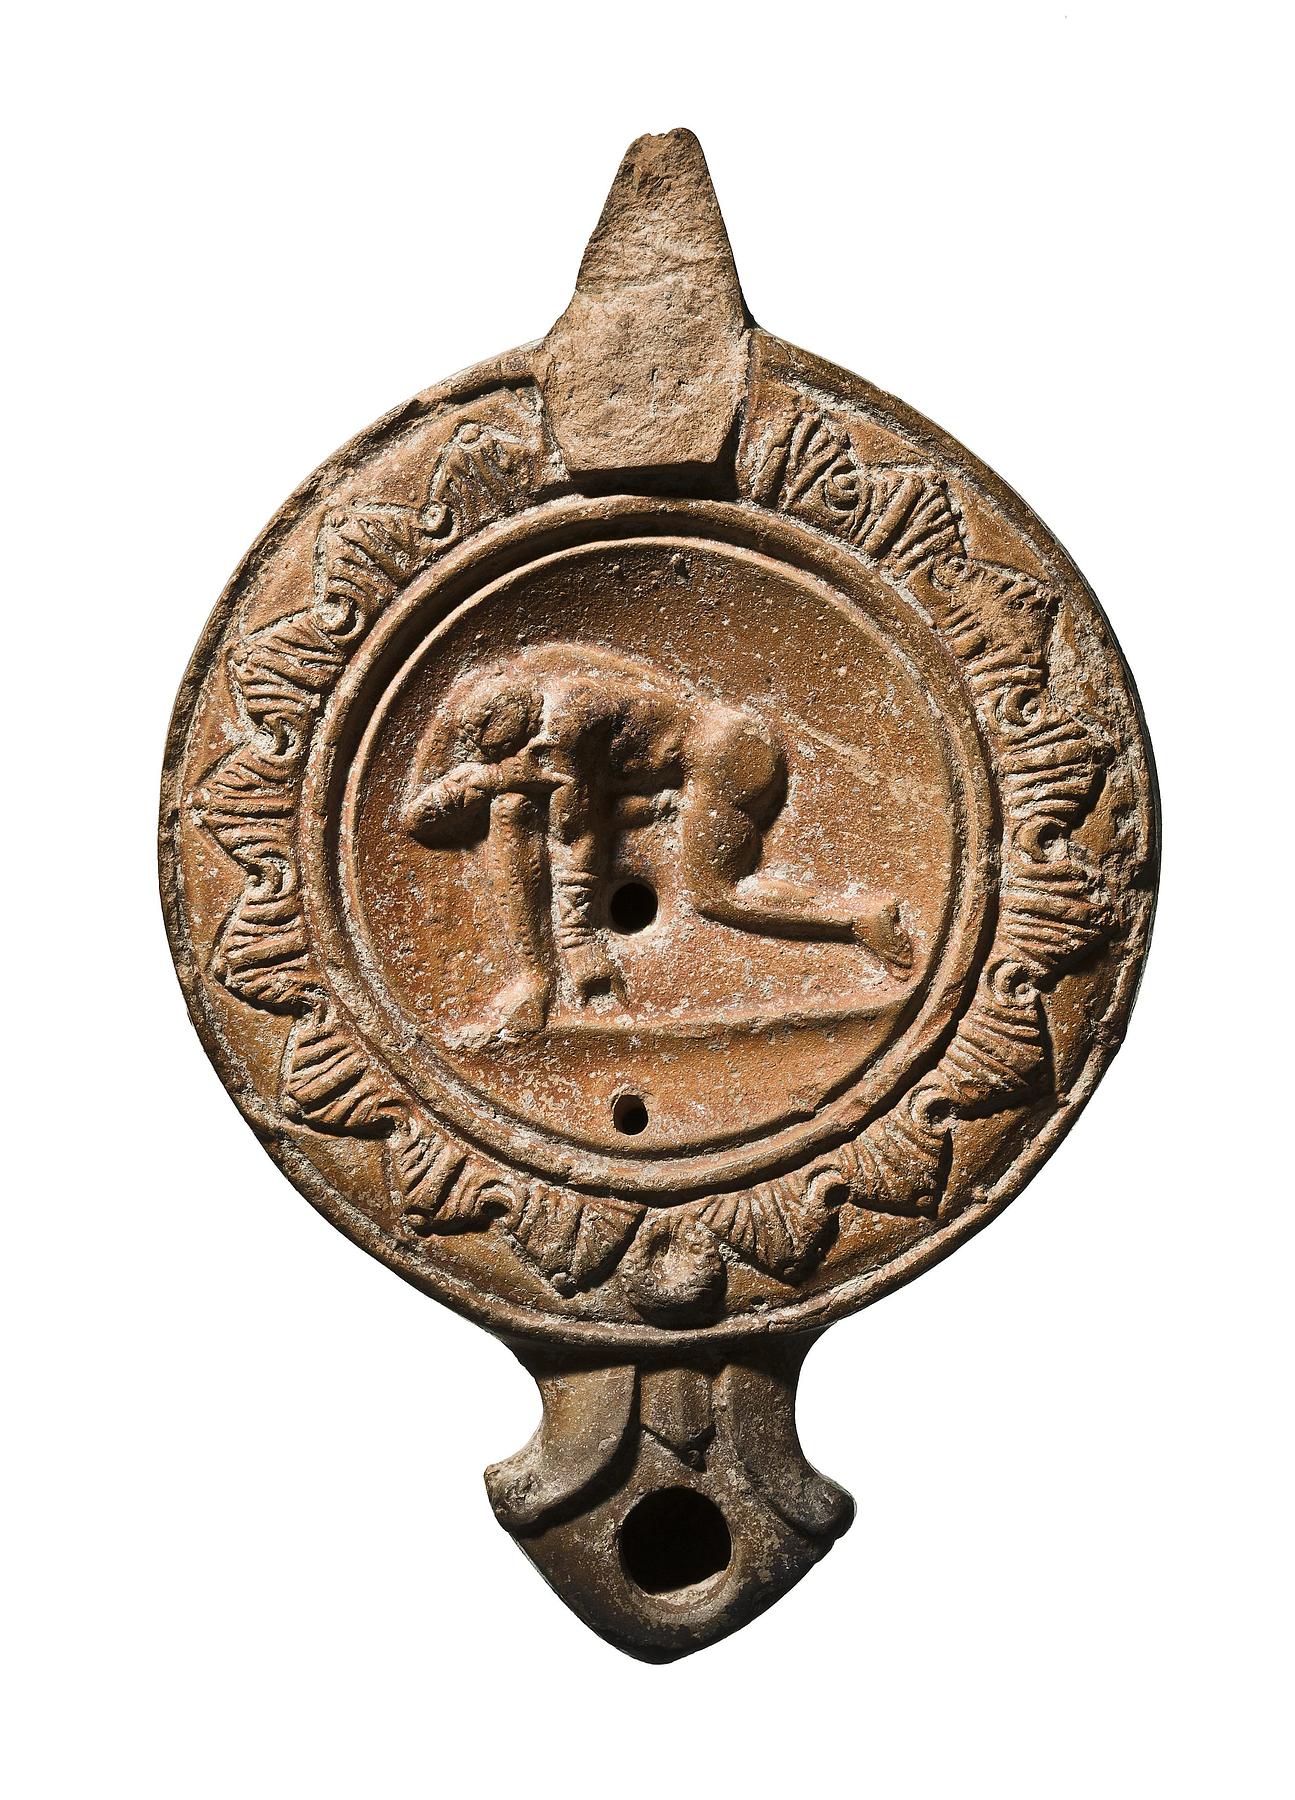 Lamp with a defeated boxer, H1185